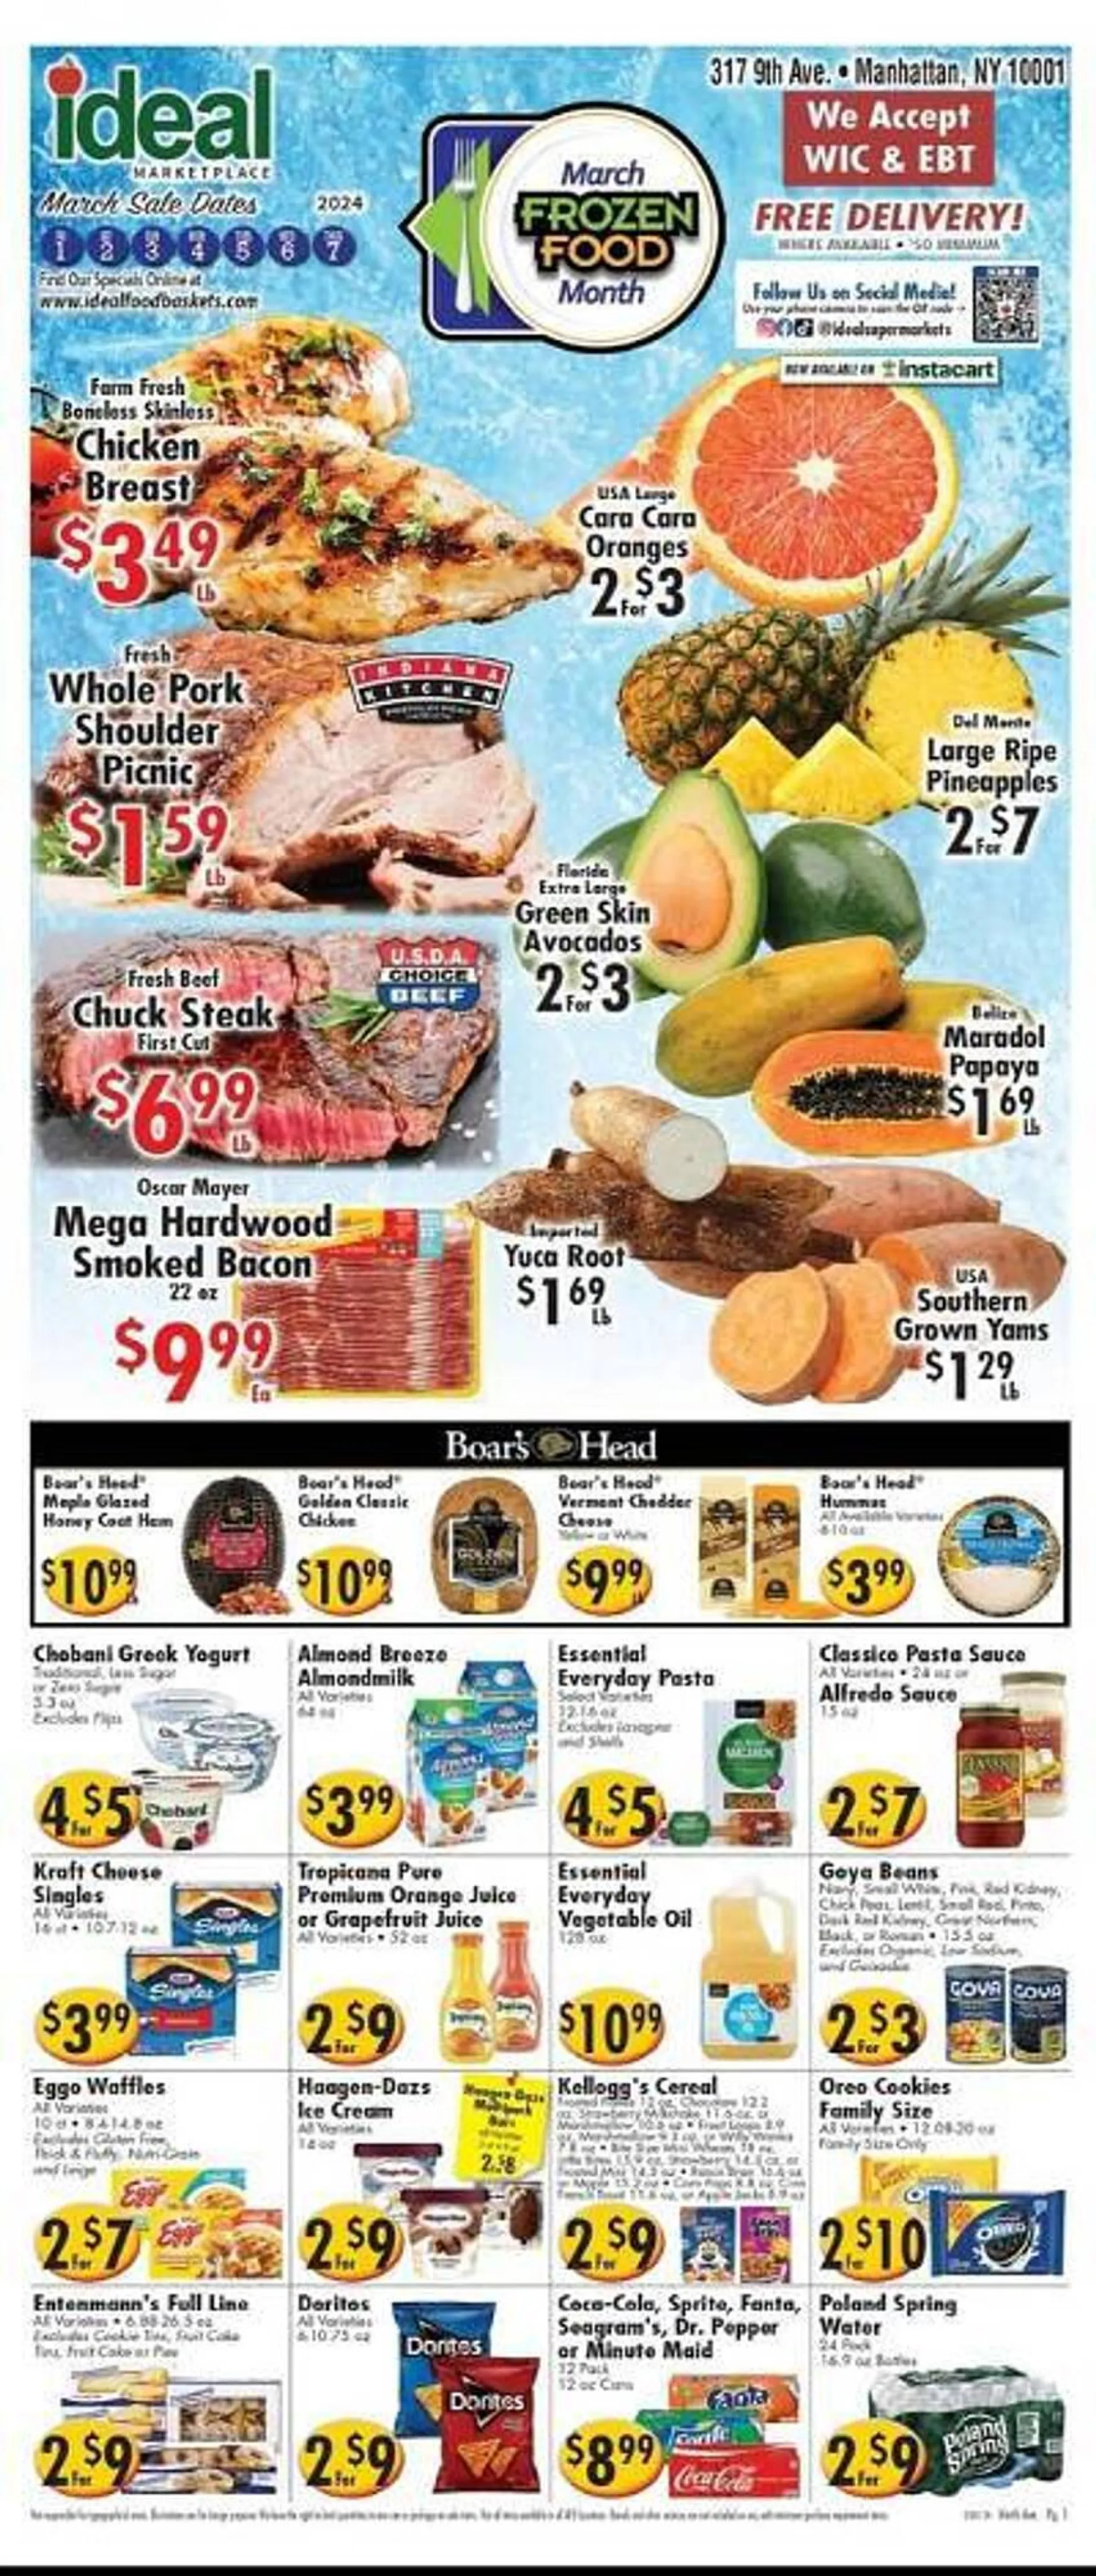 Weekly ad Ideal Food Basket Weekly Ad from March 1 to March 7 2024 - Page 